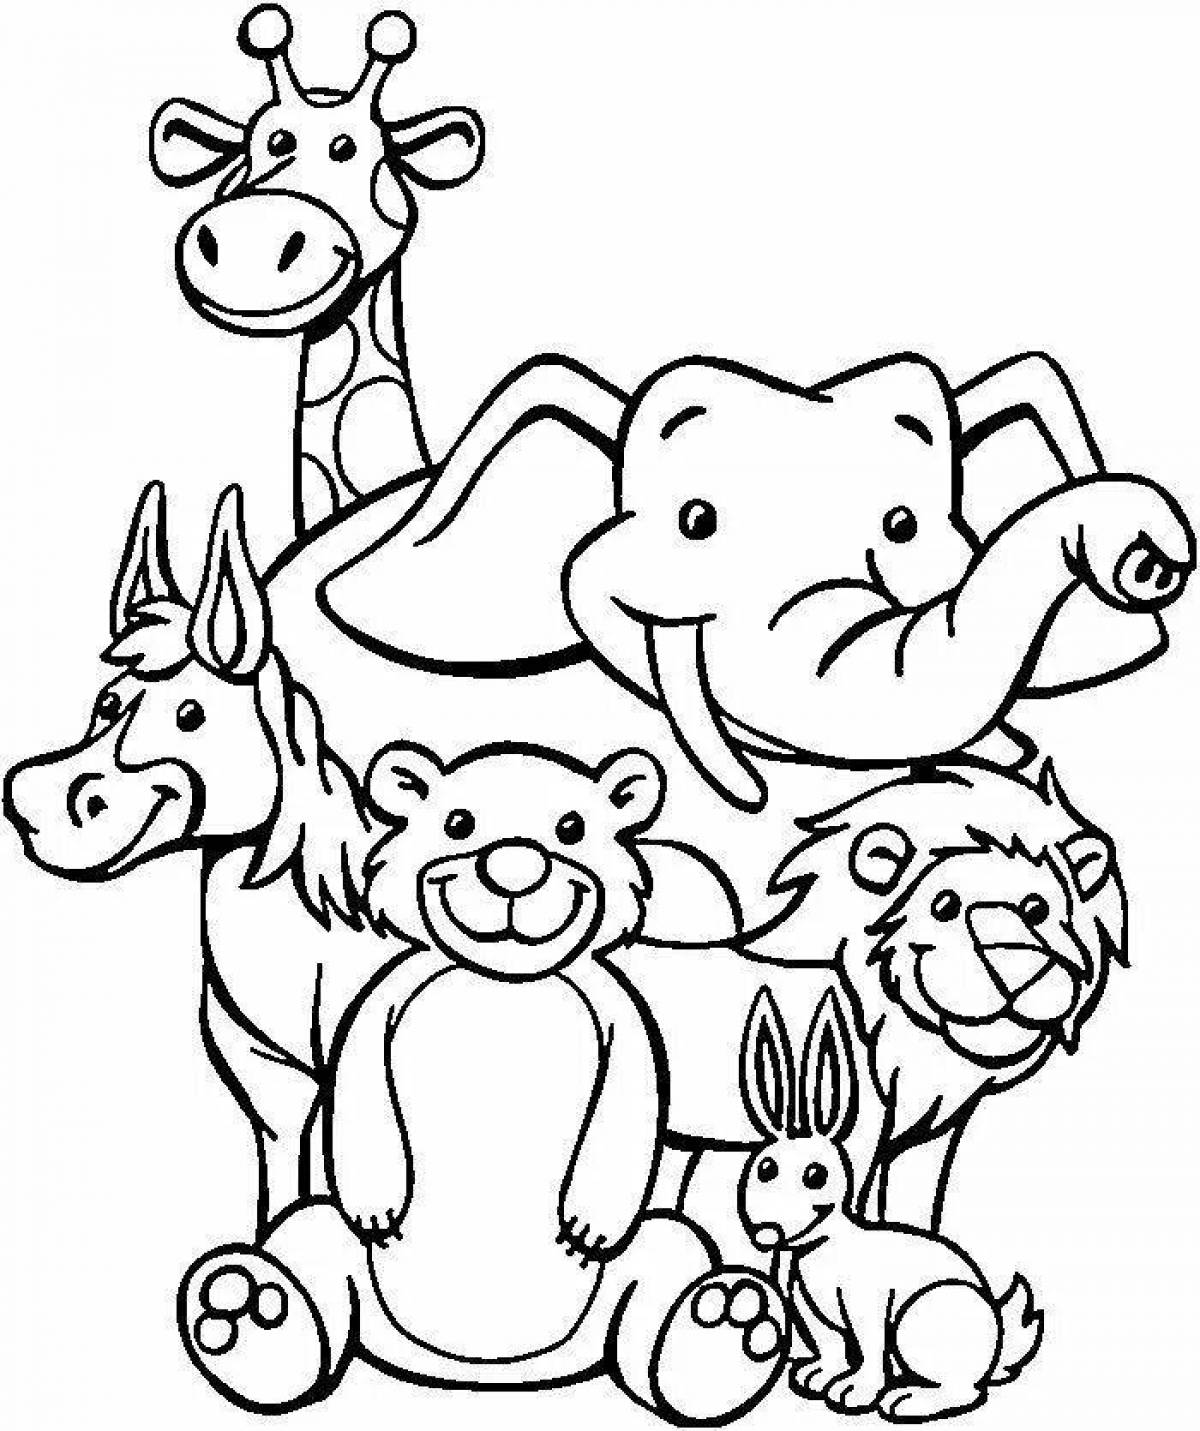 Fun zoo coloring pages for kids